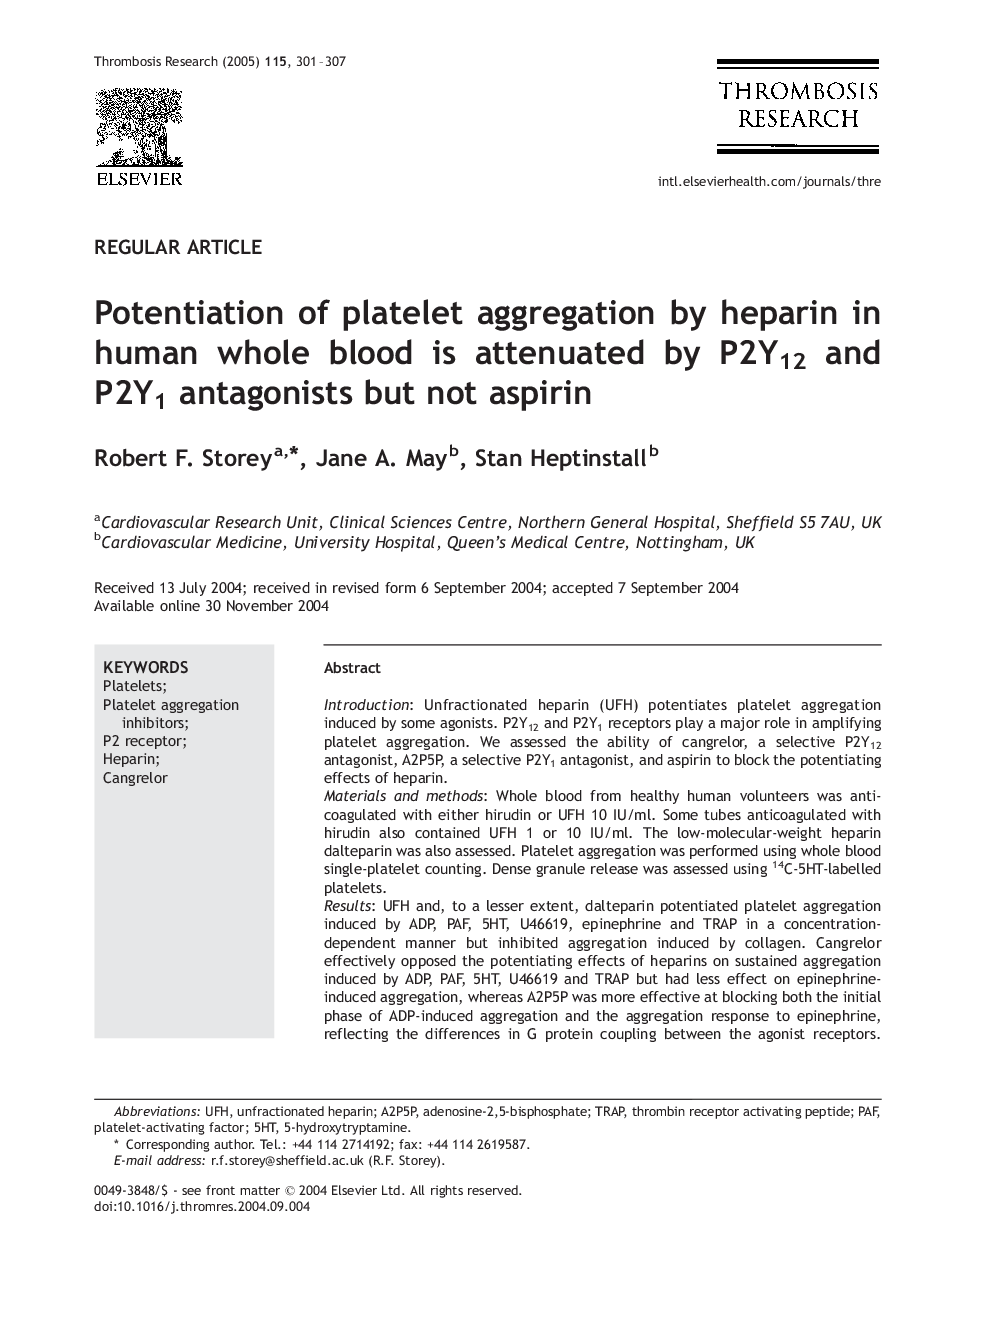 Potentiation of platelet aggregation by heparin in human whole blood is attenuated by P2Y12 and P2Y1 antagonists but not aspirin